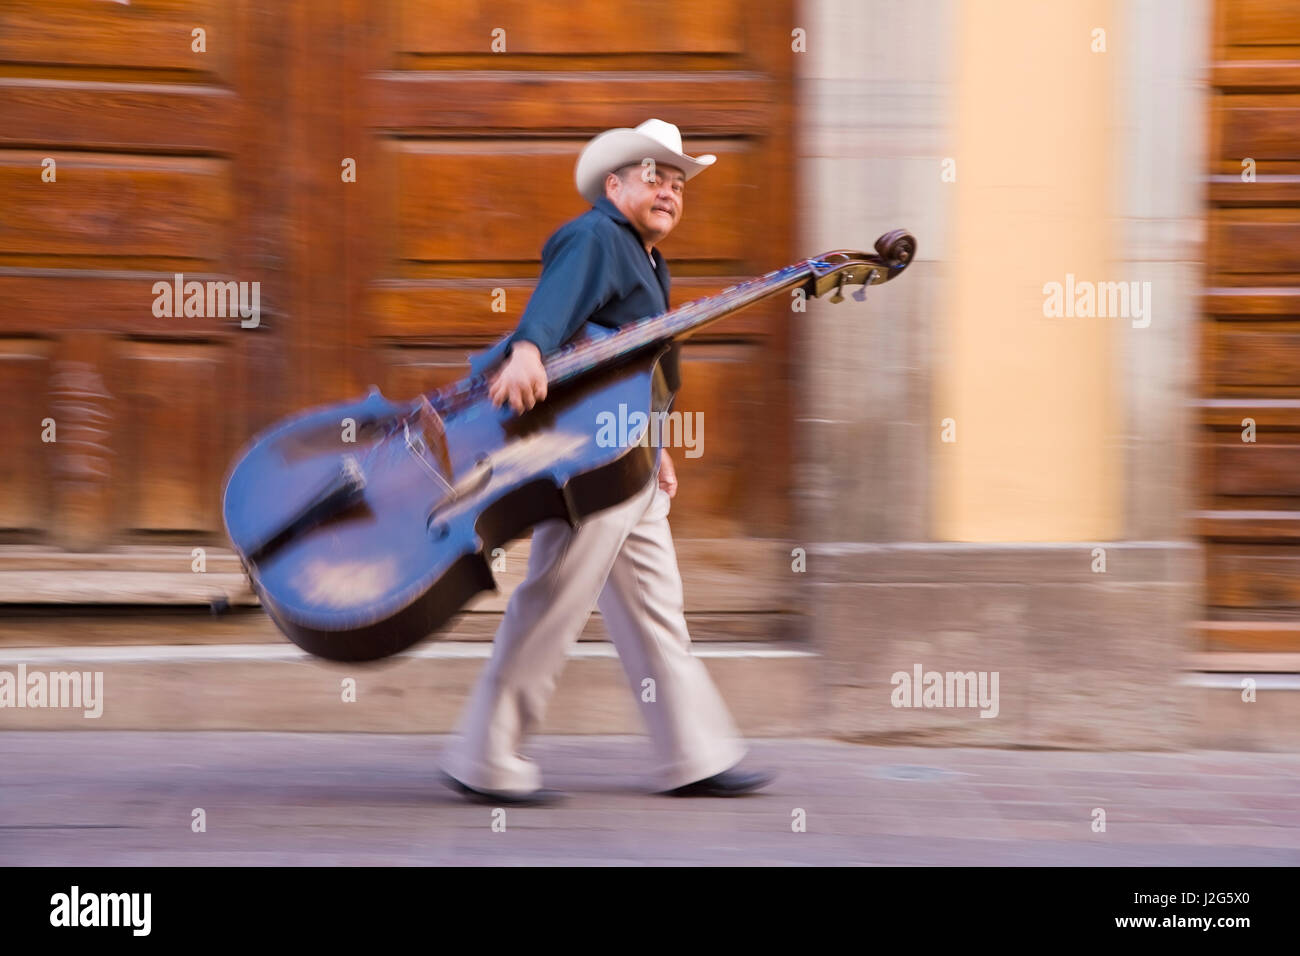 Double Bass player in street, Guanajuato, Mexico Stock Photo